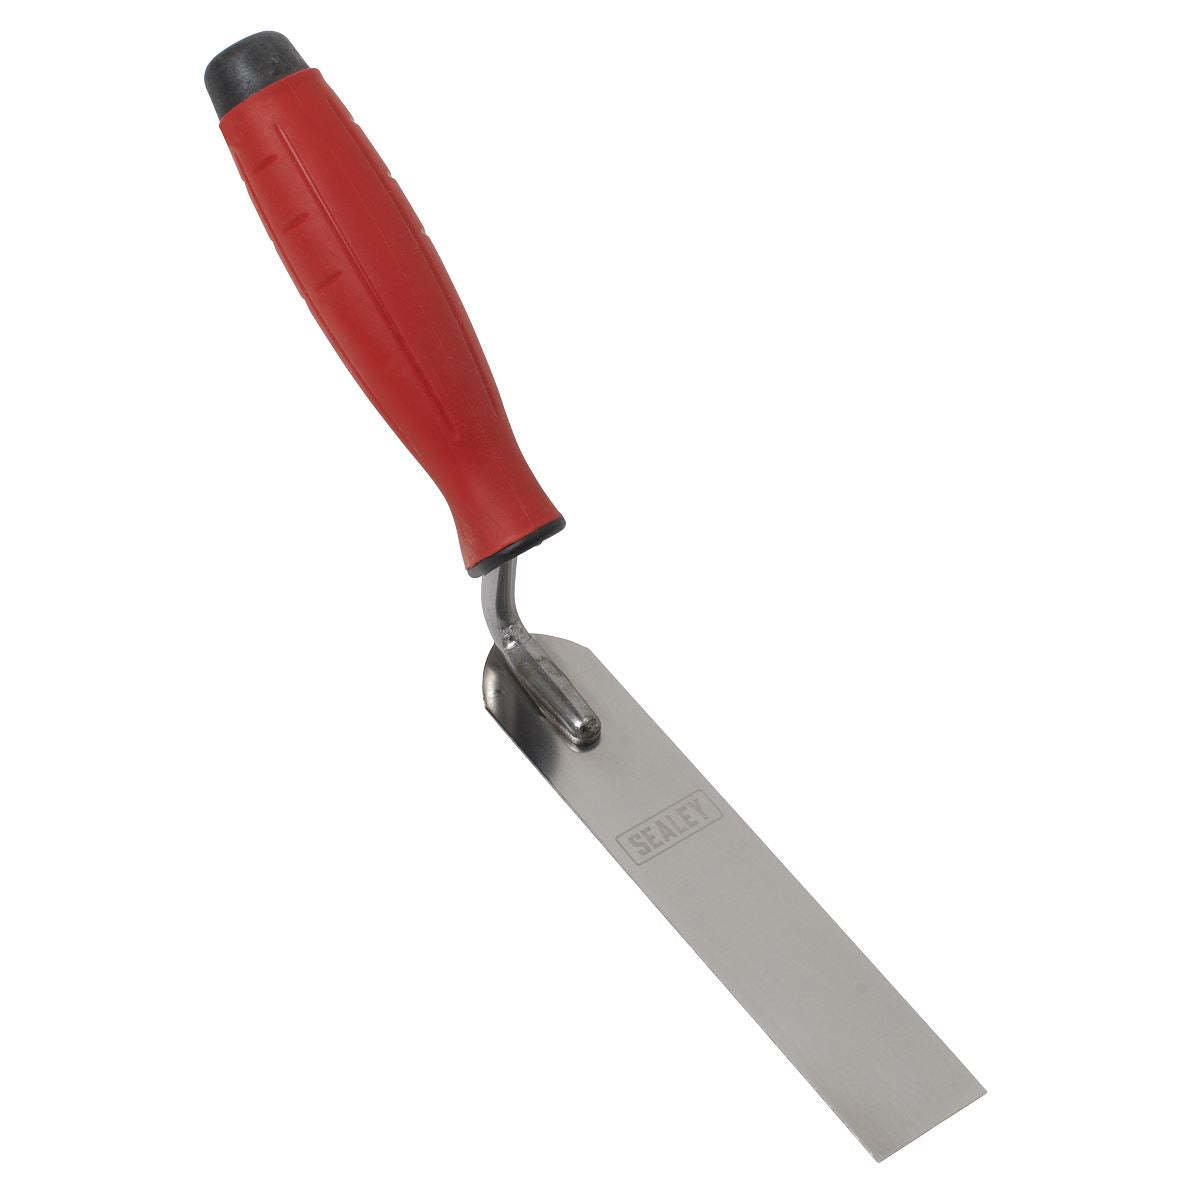 Sealey Stainless Steel Finishing Trowel - Rubber Handle - 30 x 160mm